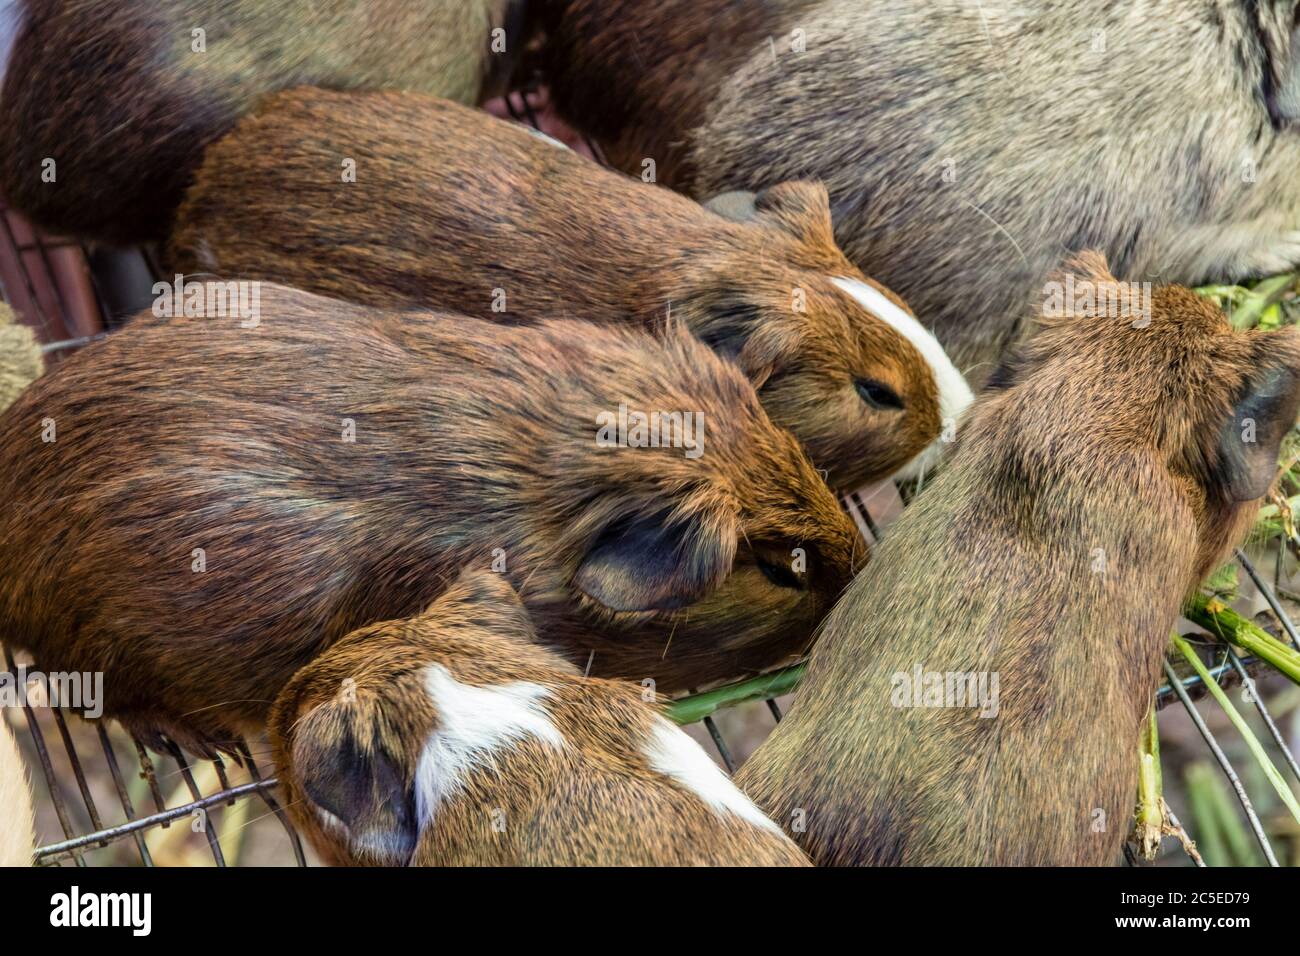 Guinea pigs, in South America called cuys, on sale in the market of Guamote, Stock Photo